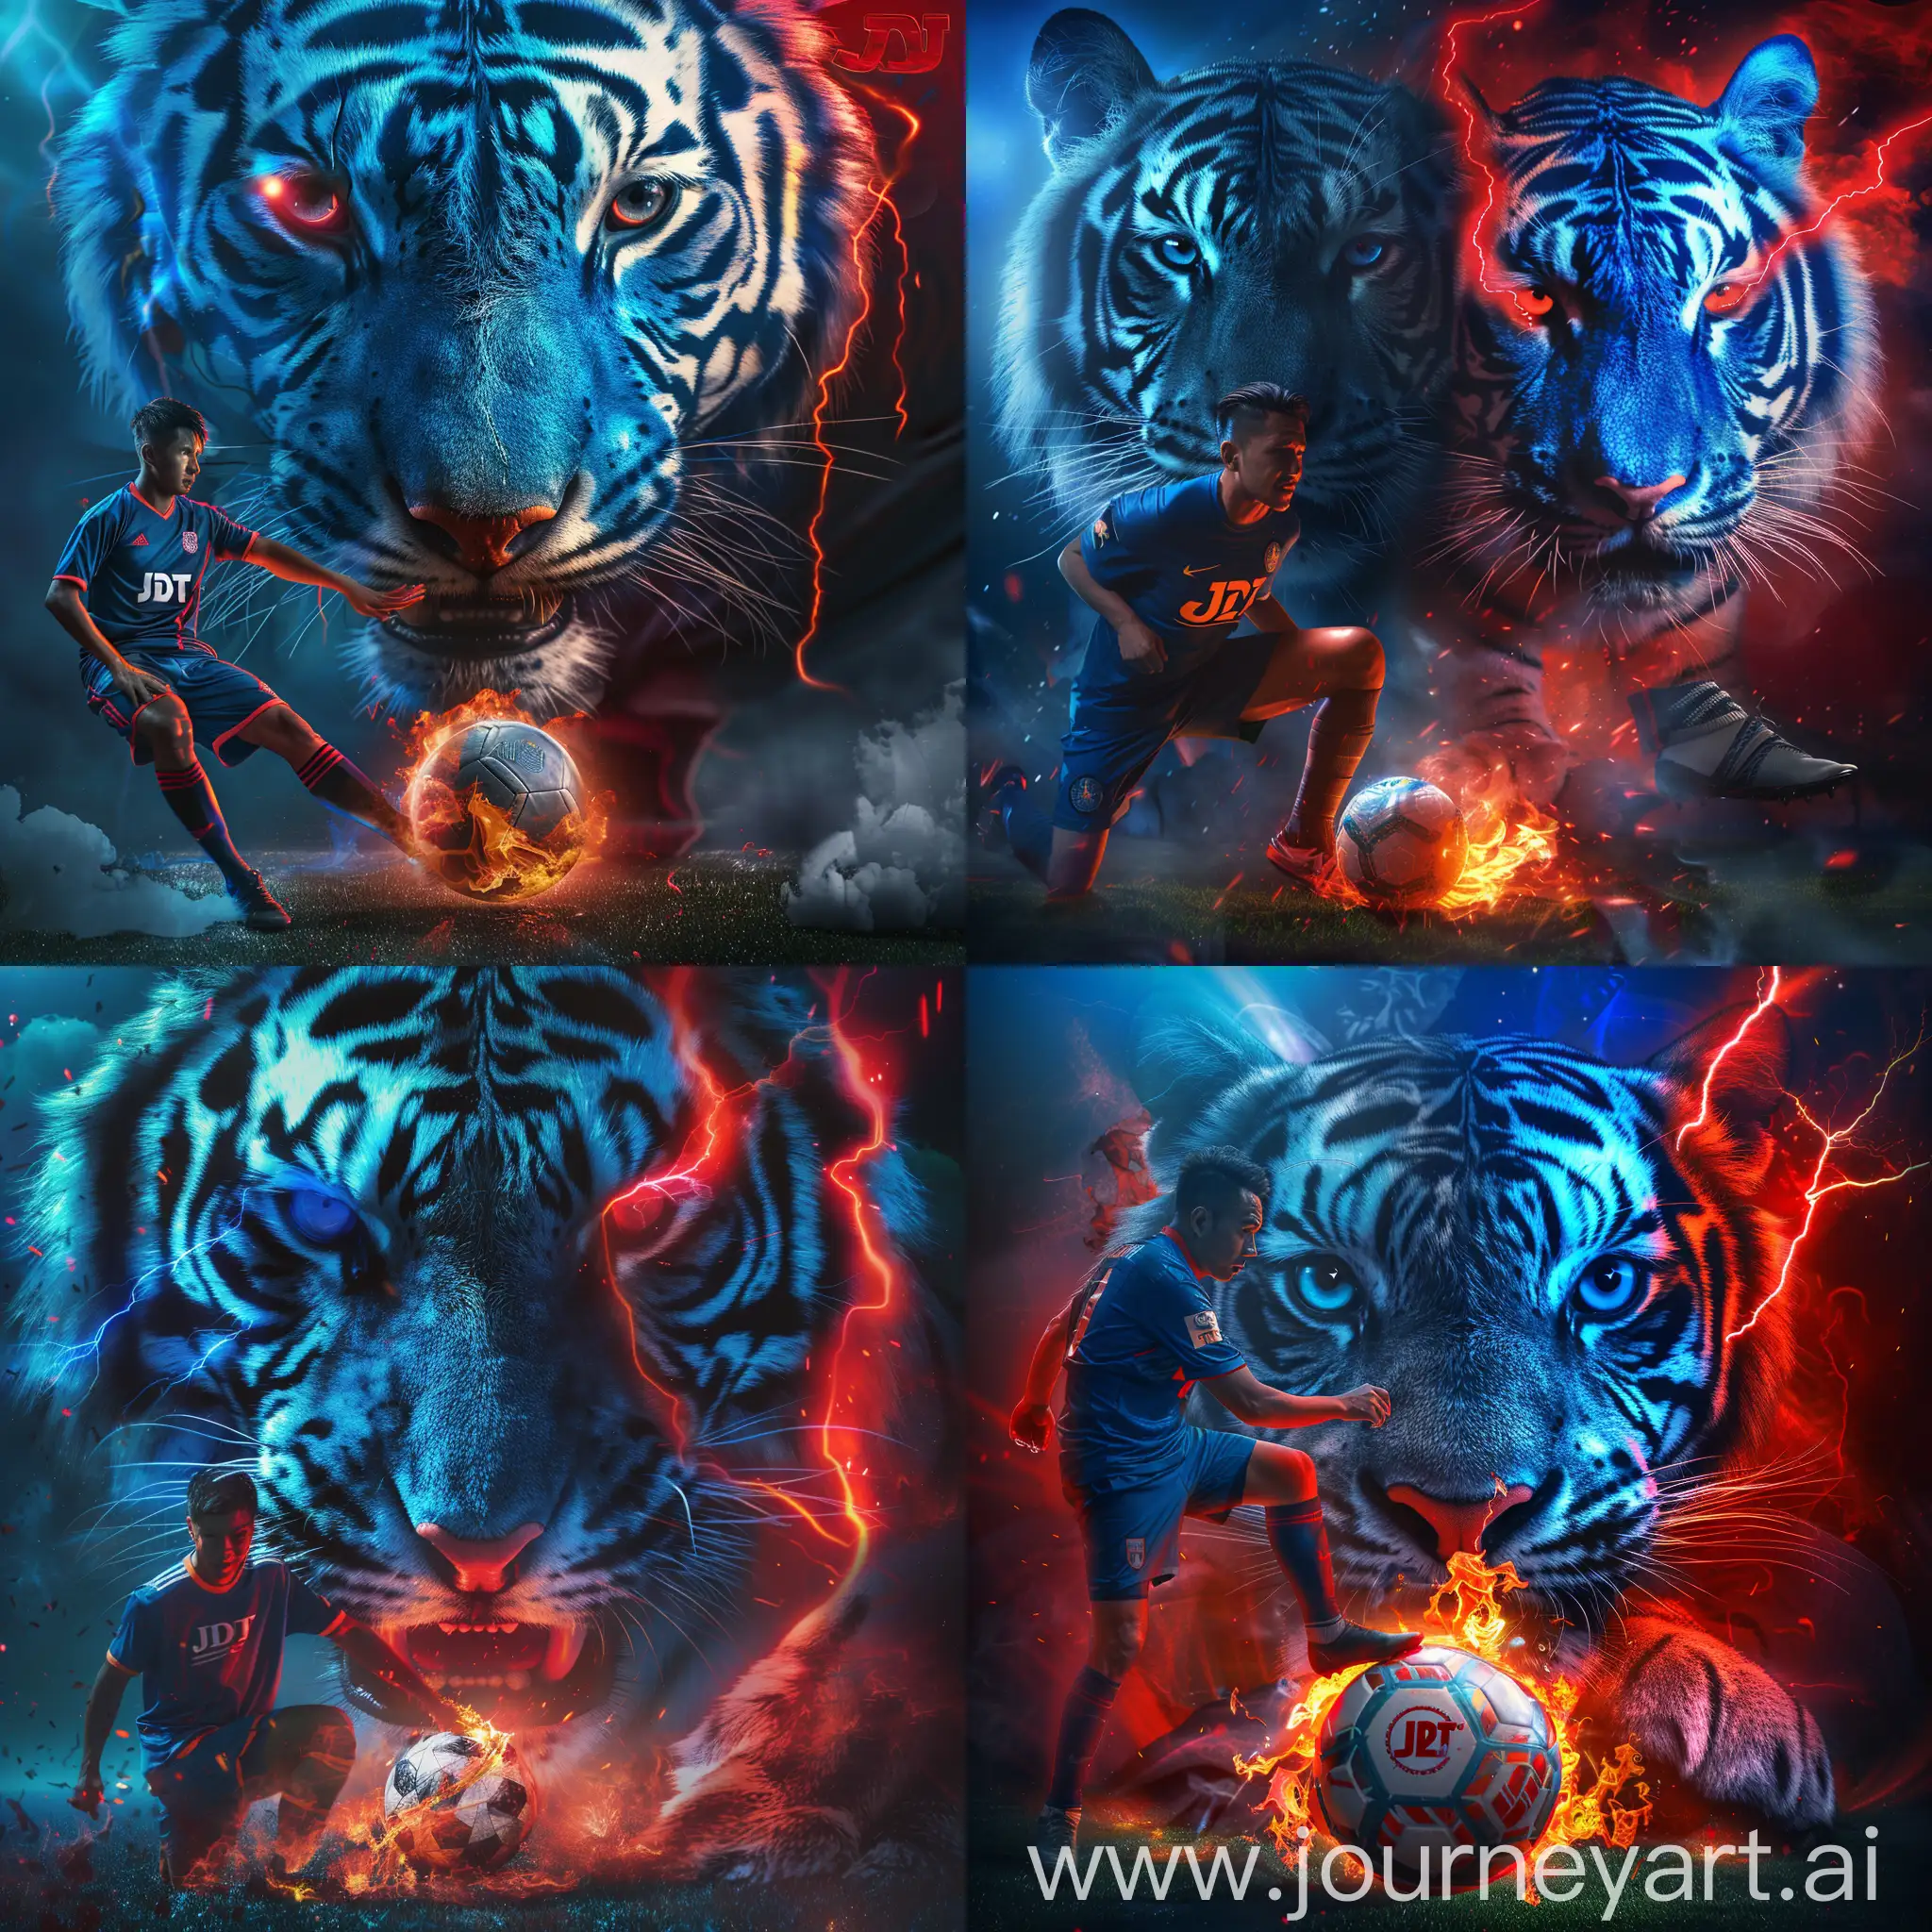 Epic-Blue-and-Red-Tiger-Face-with-Soccer-Player-on-Fireball